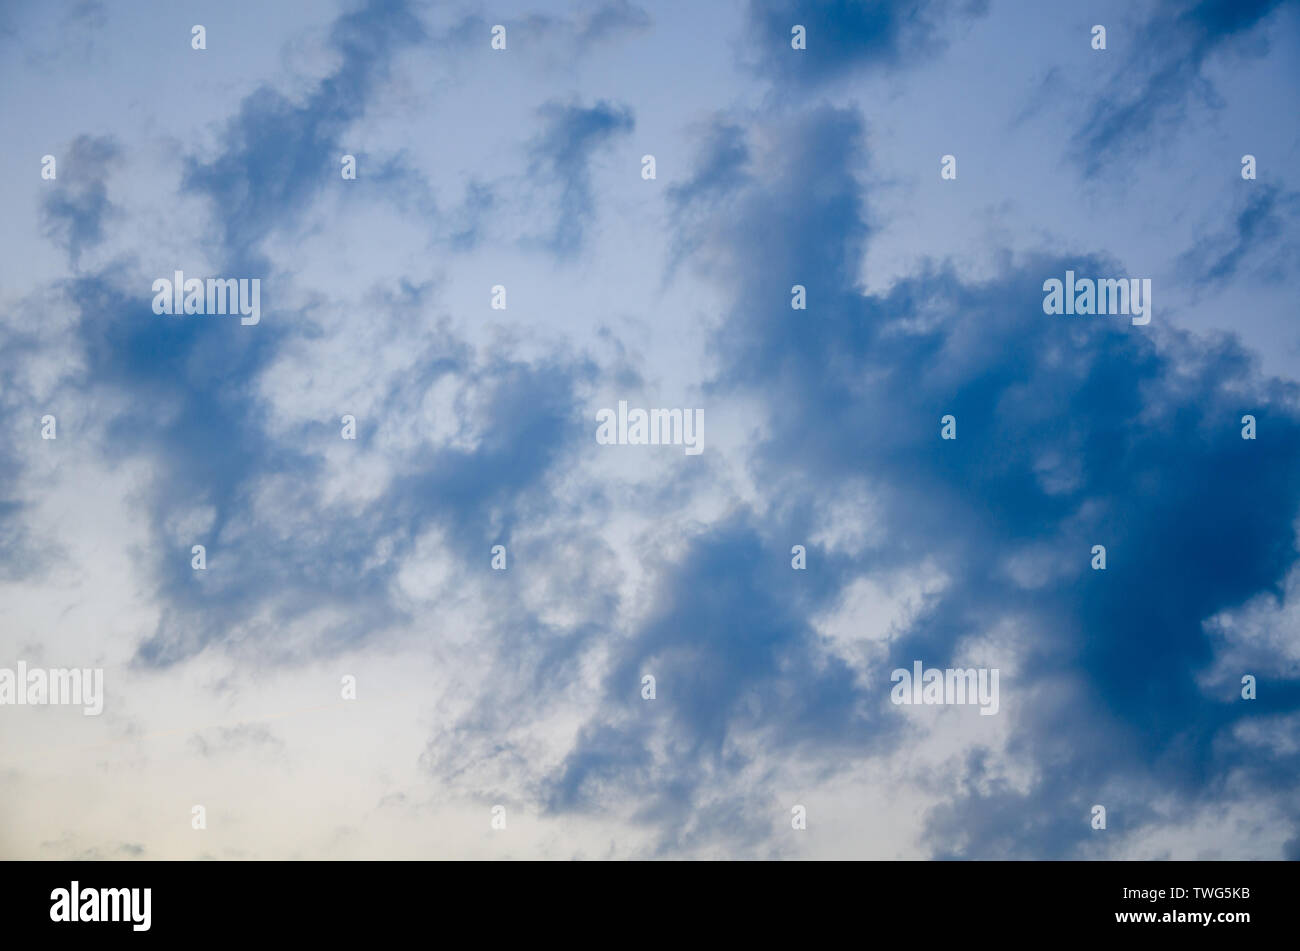 Blue sky background with abstract clouds Stock Photo